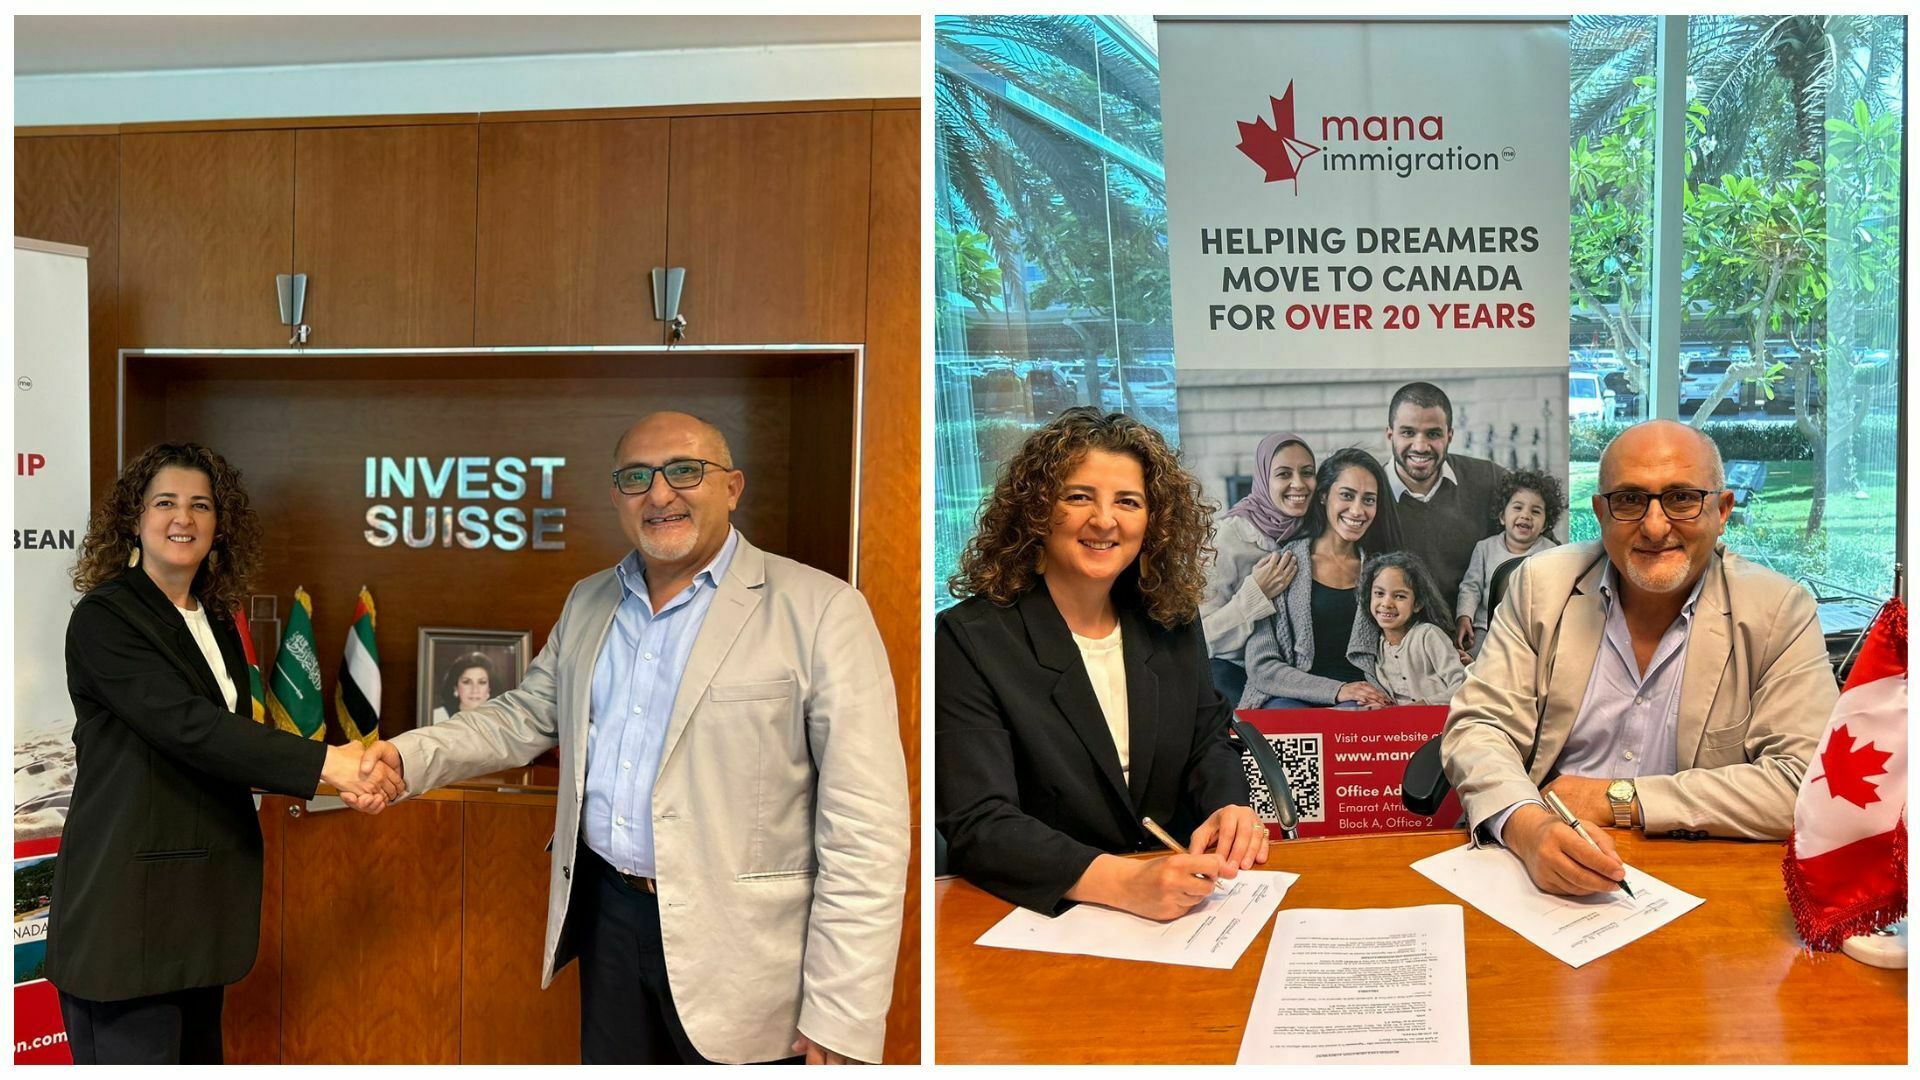 PRESS RELEASE: Dubai Welcomes mana immigration: New Office